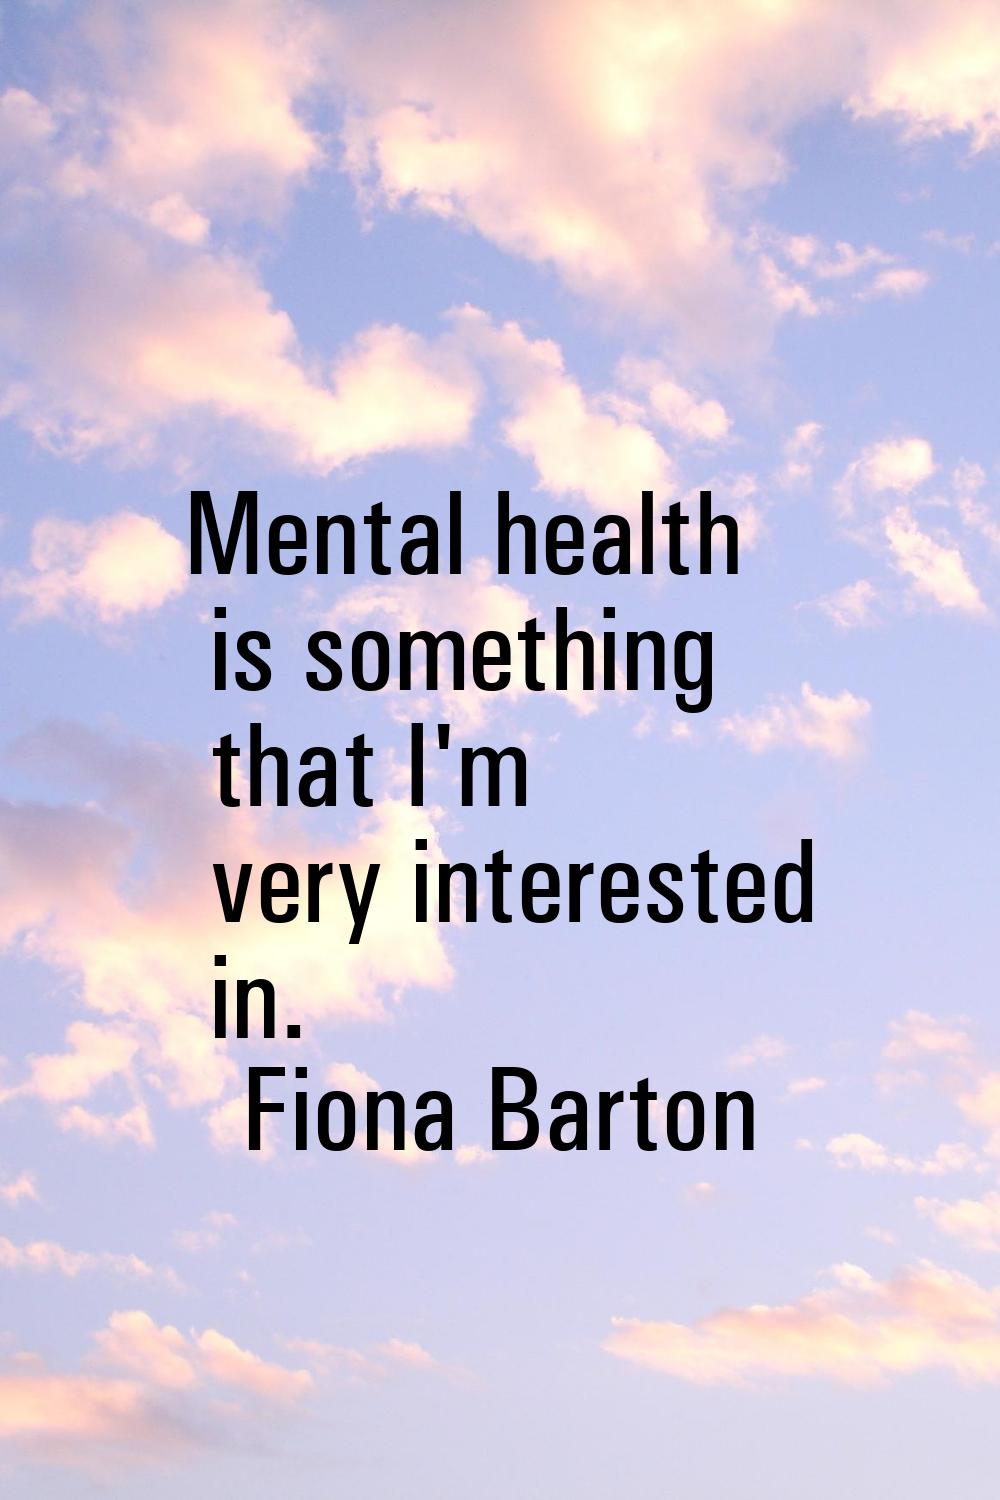 Mental health is something that I'm very interested in.